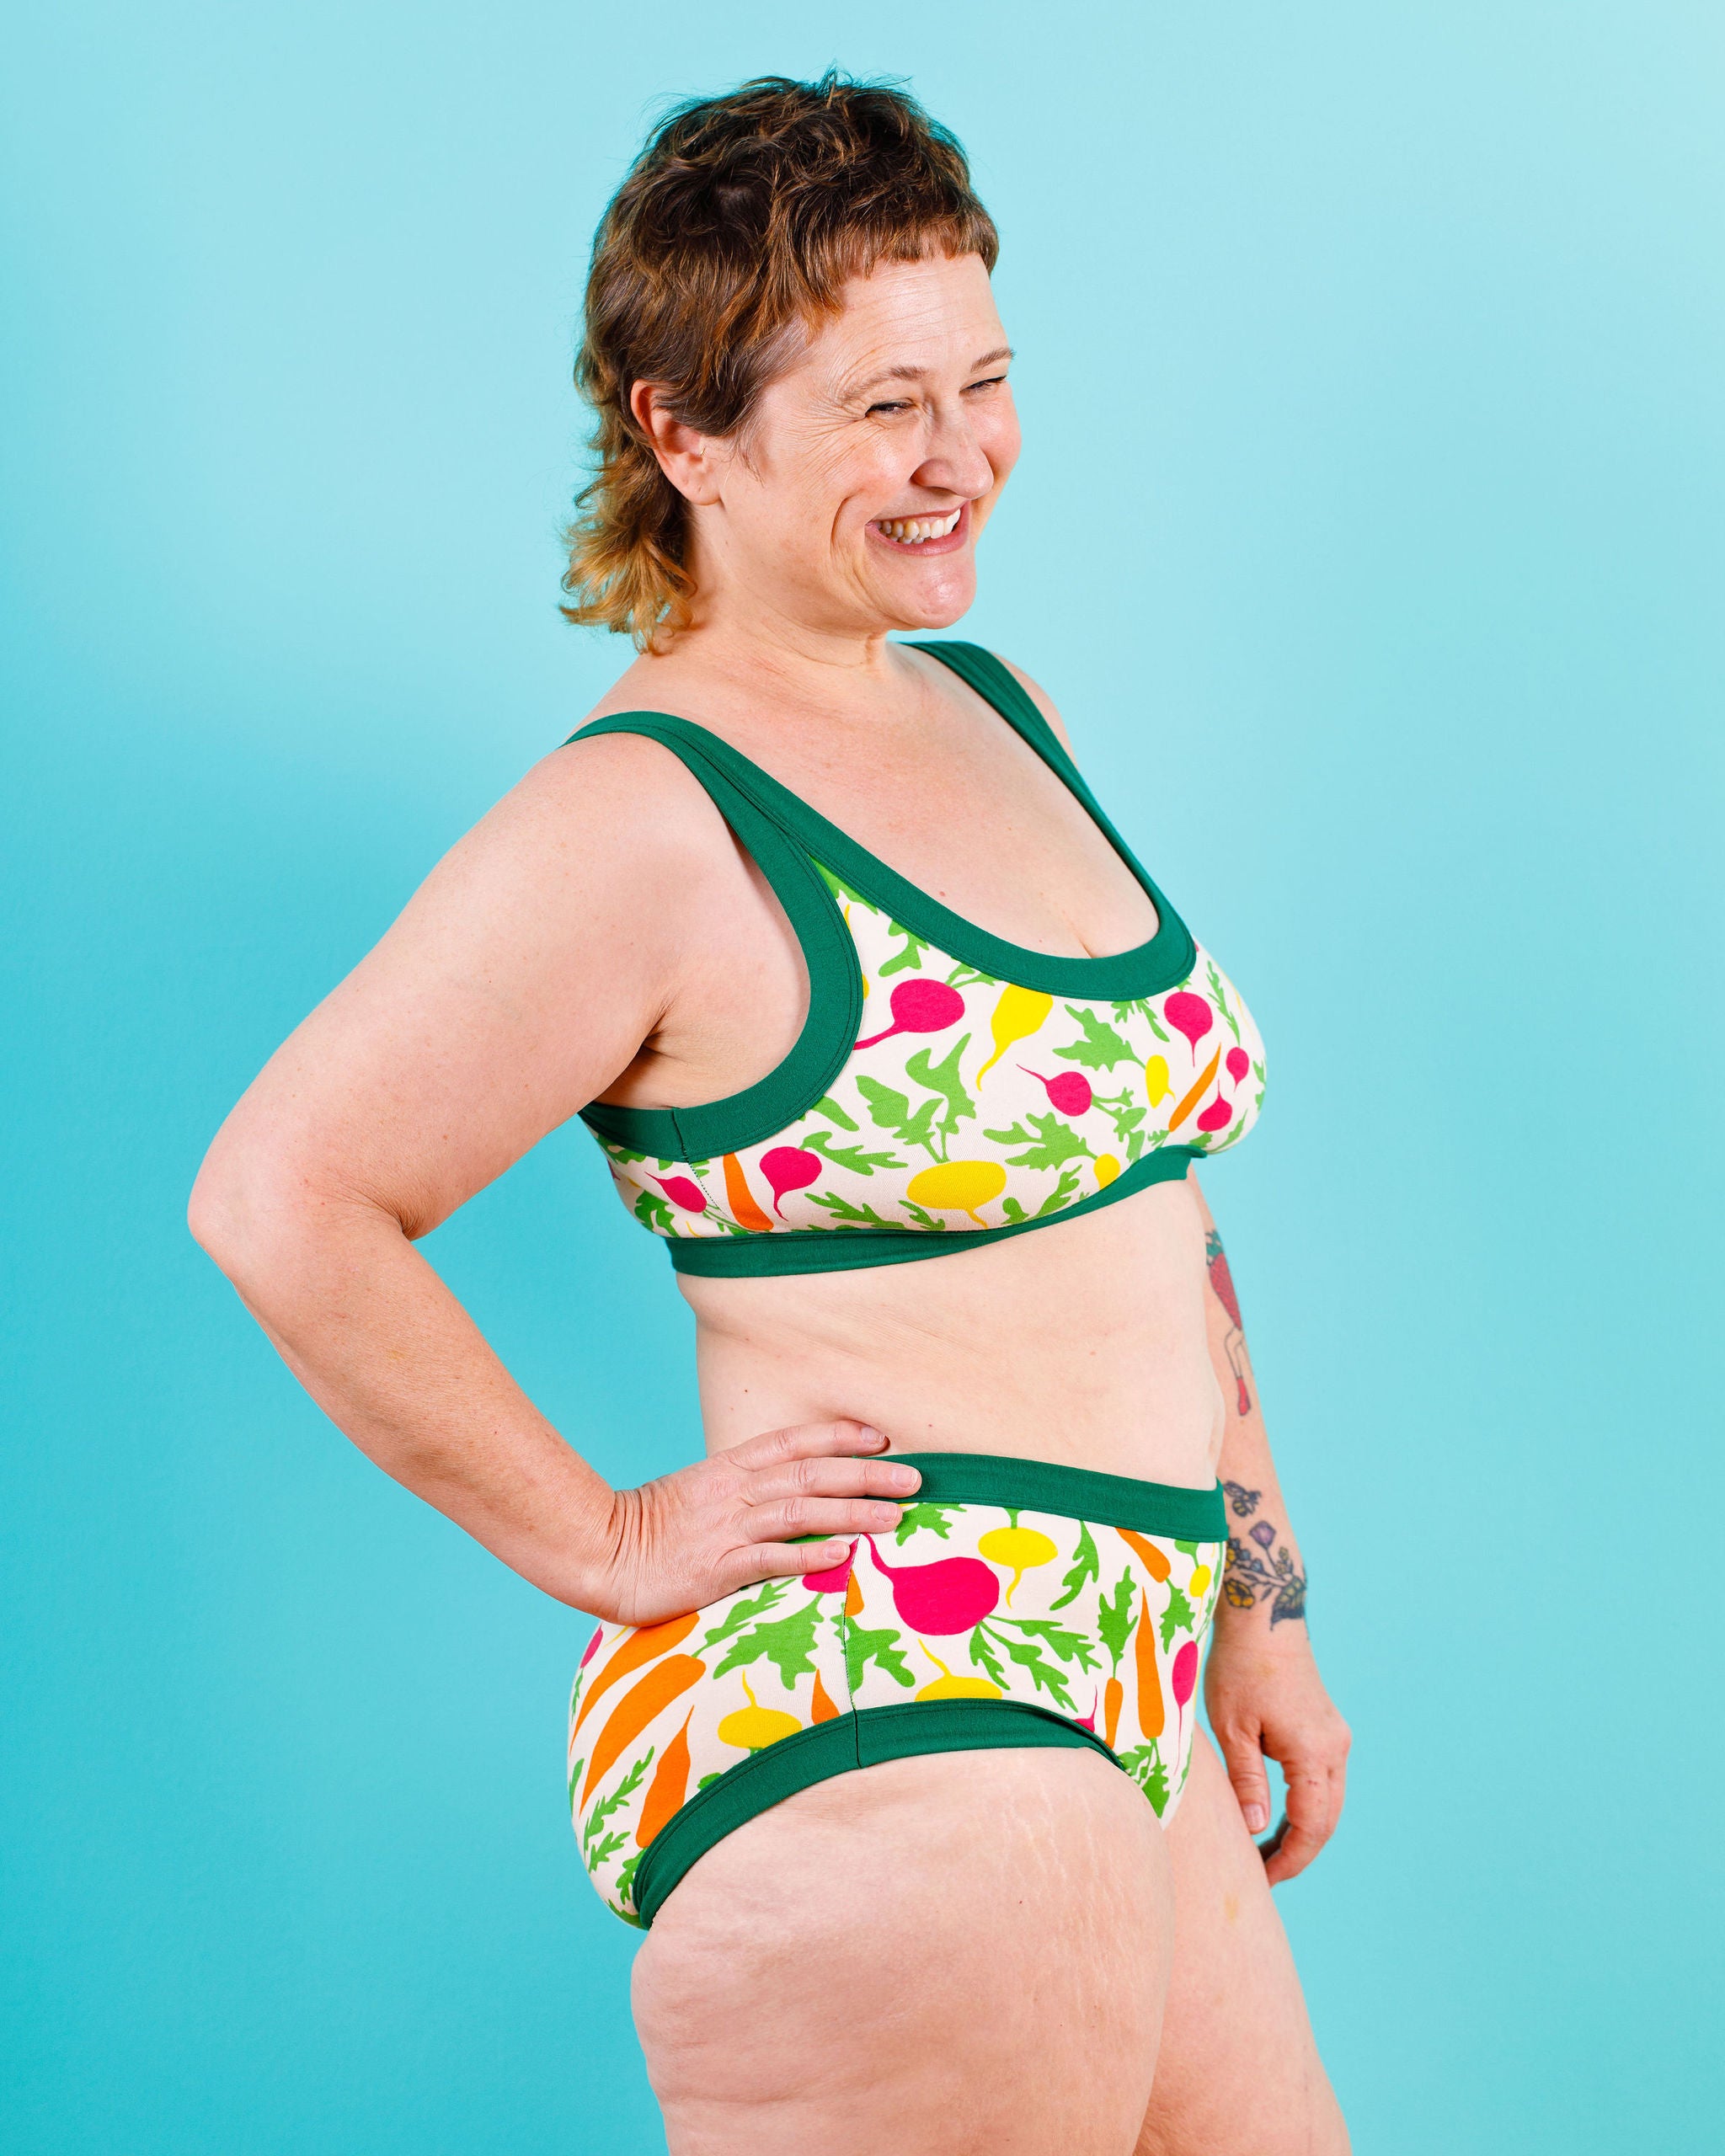 Model smiling wearing  Thunderants Hipster style underwear and matching Bralette in Root Veggies print - yellow, orange, pink, and green vegetables.